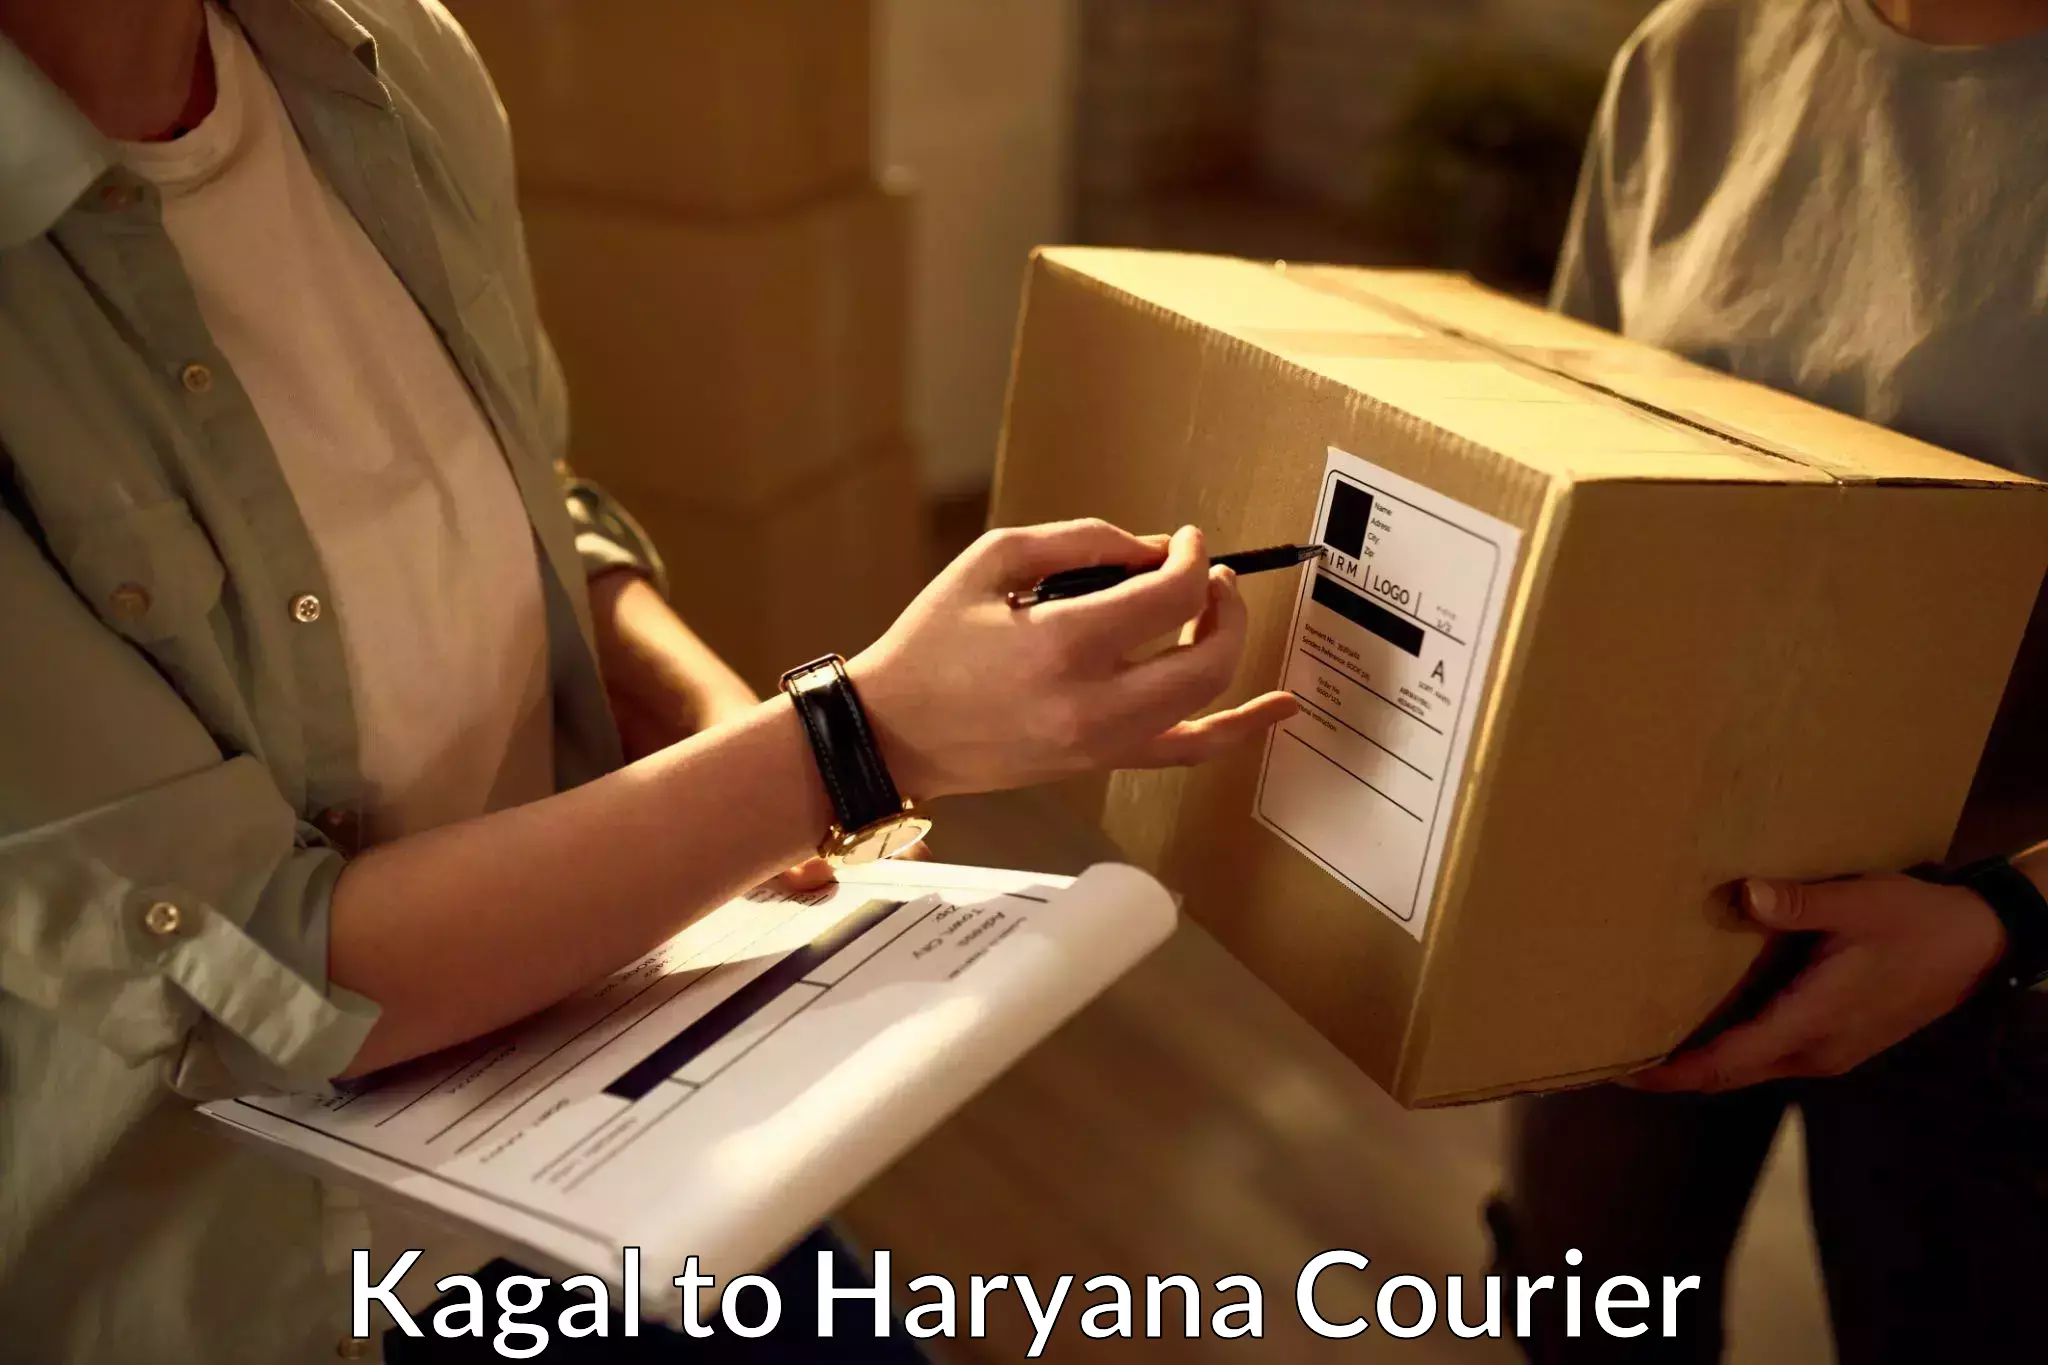 Courier service comparison Kagal to Pehowa